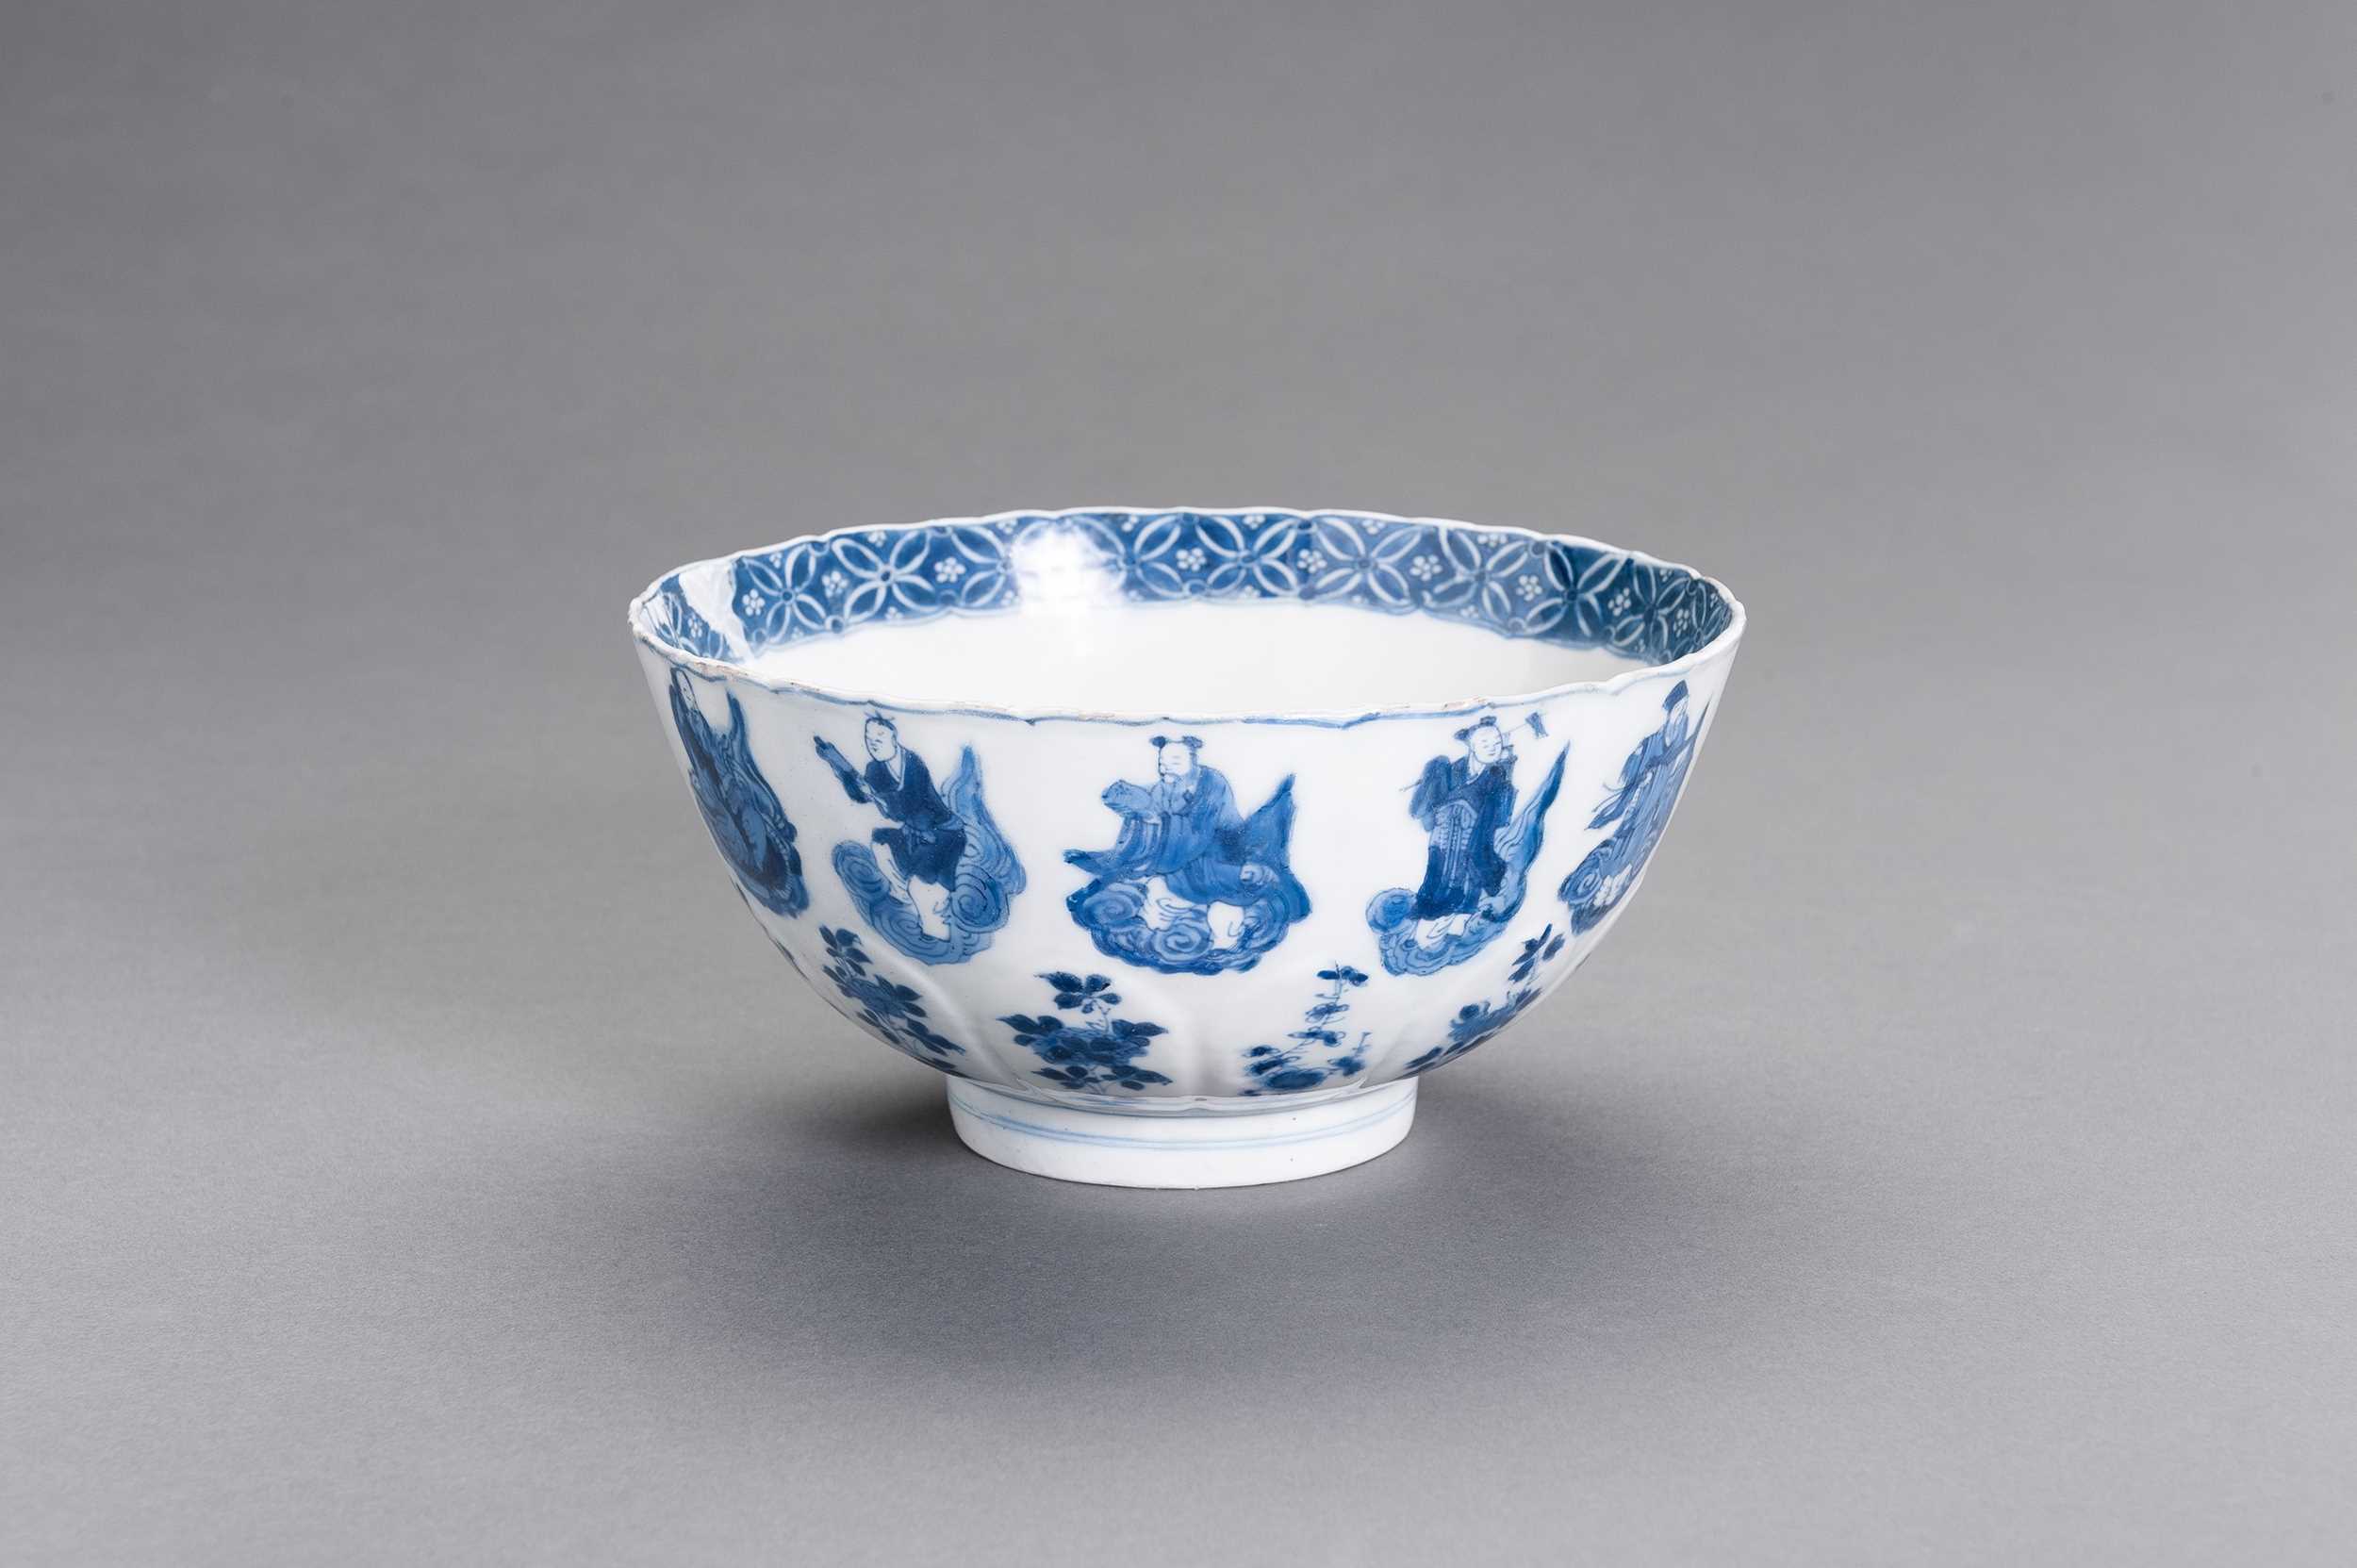 Lot 332 - A BLUE AND WHITE PORCELAIN ‘IMMORTALS’ BOWL, KANGXI